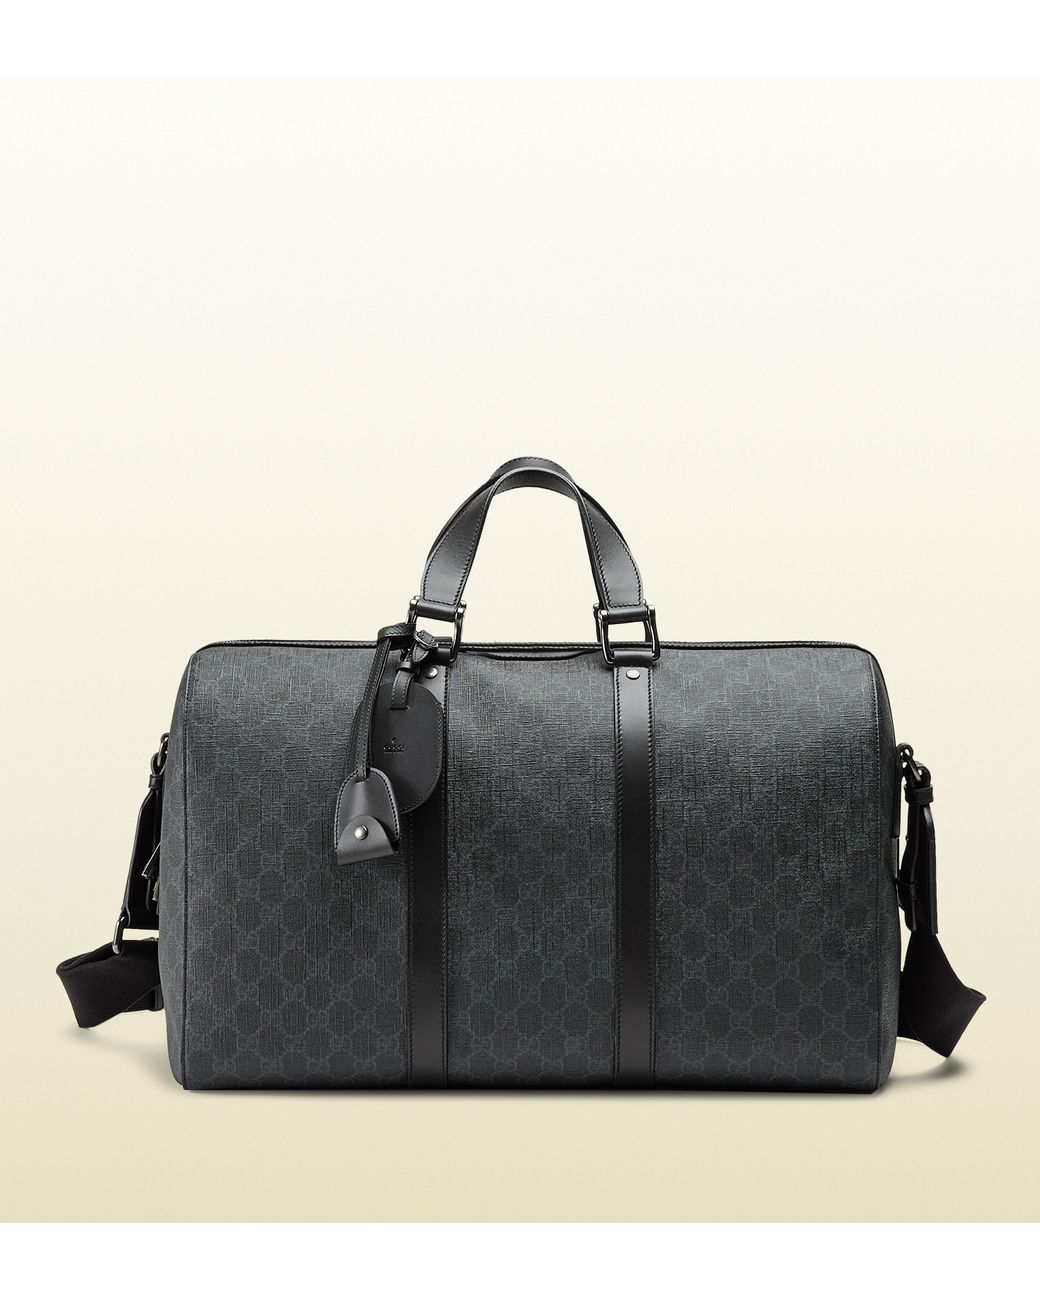 Gucci Gg Supreme Canvas Carry-on Duffle Bag in Black for Men | Lyst